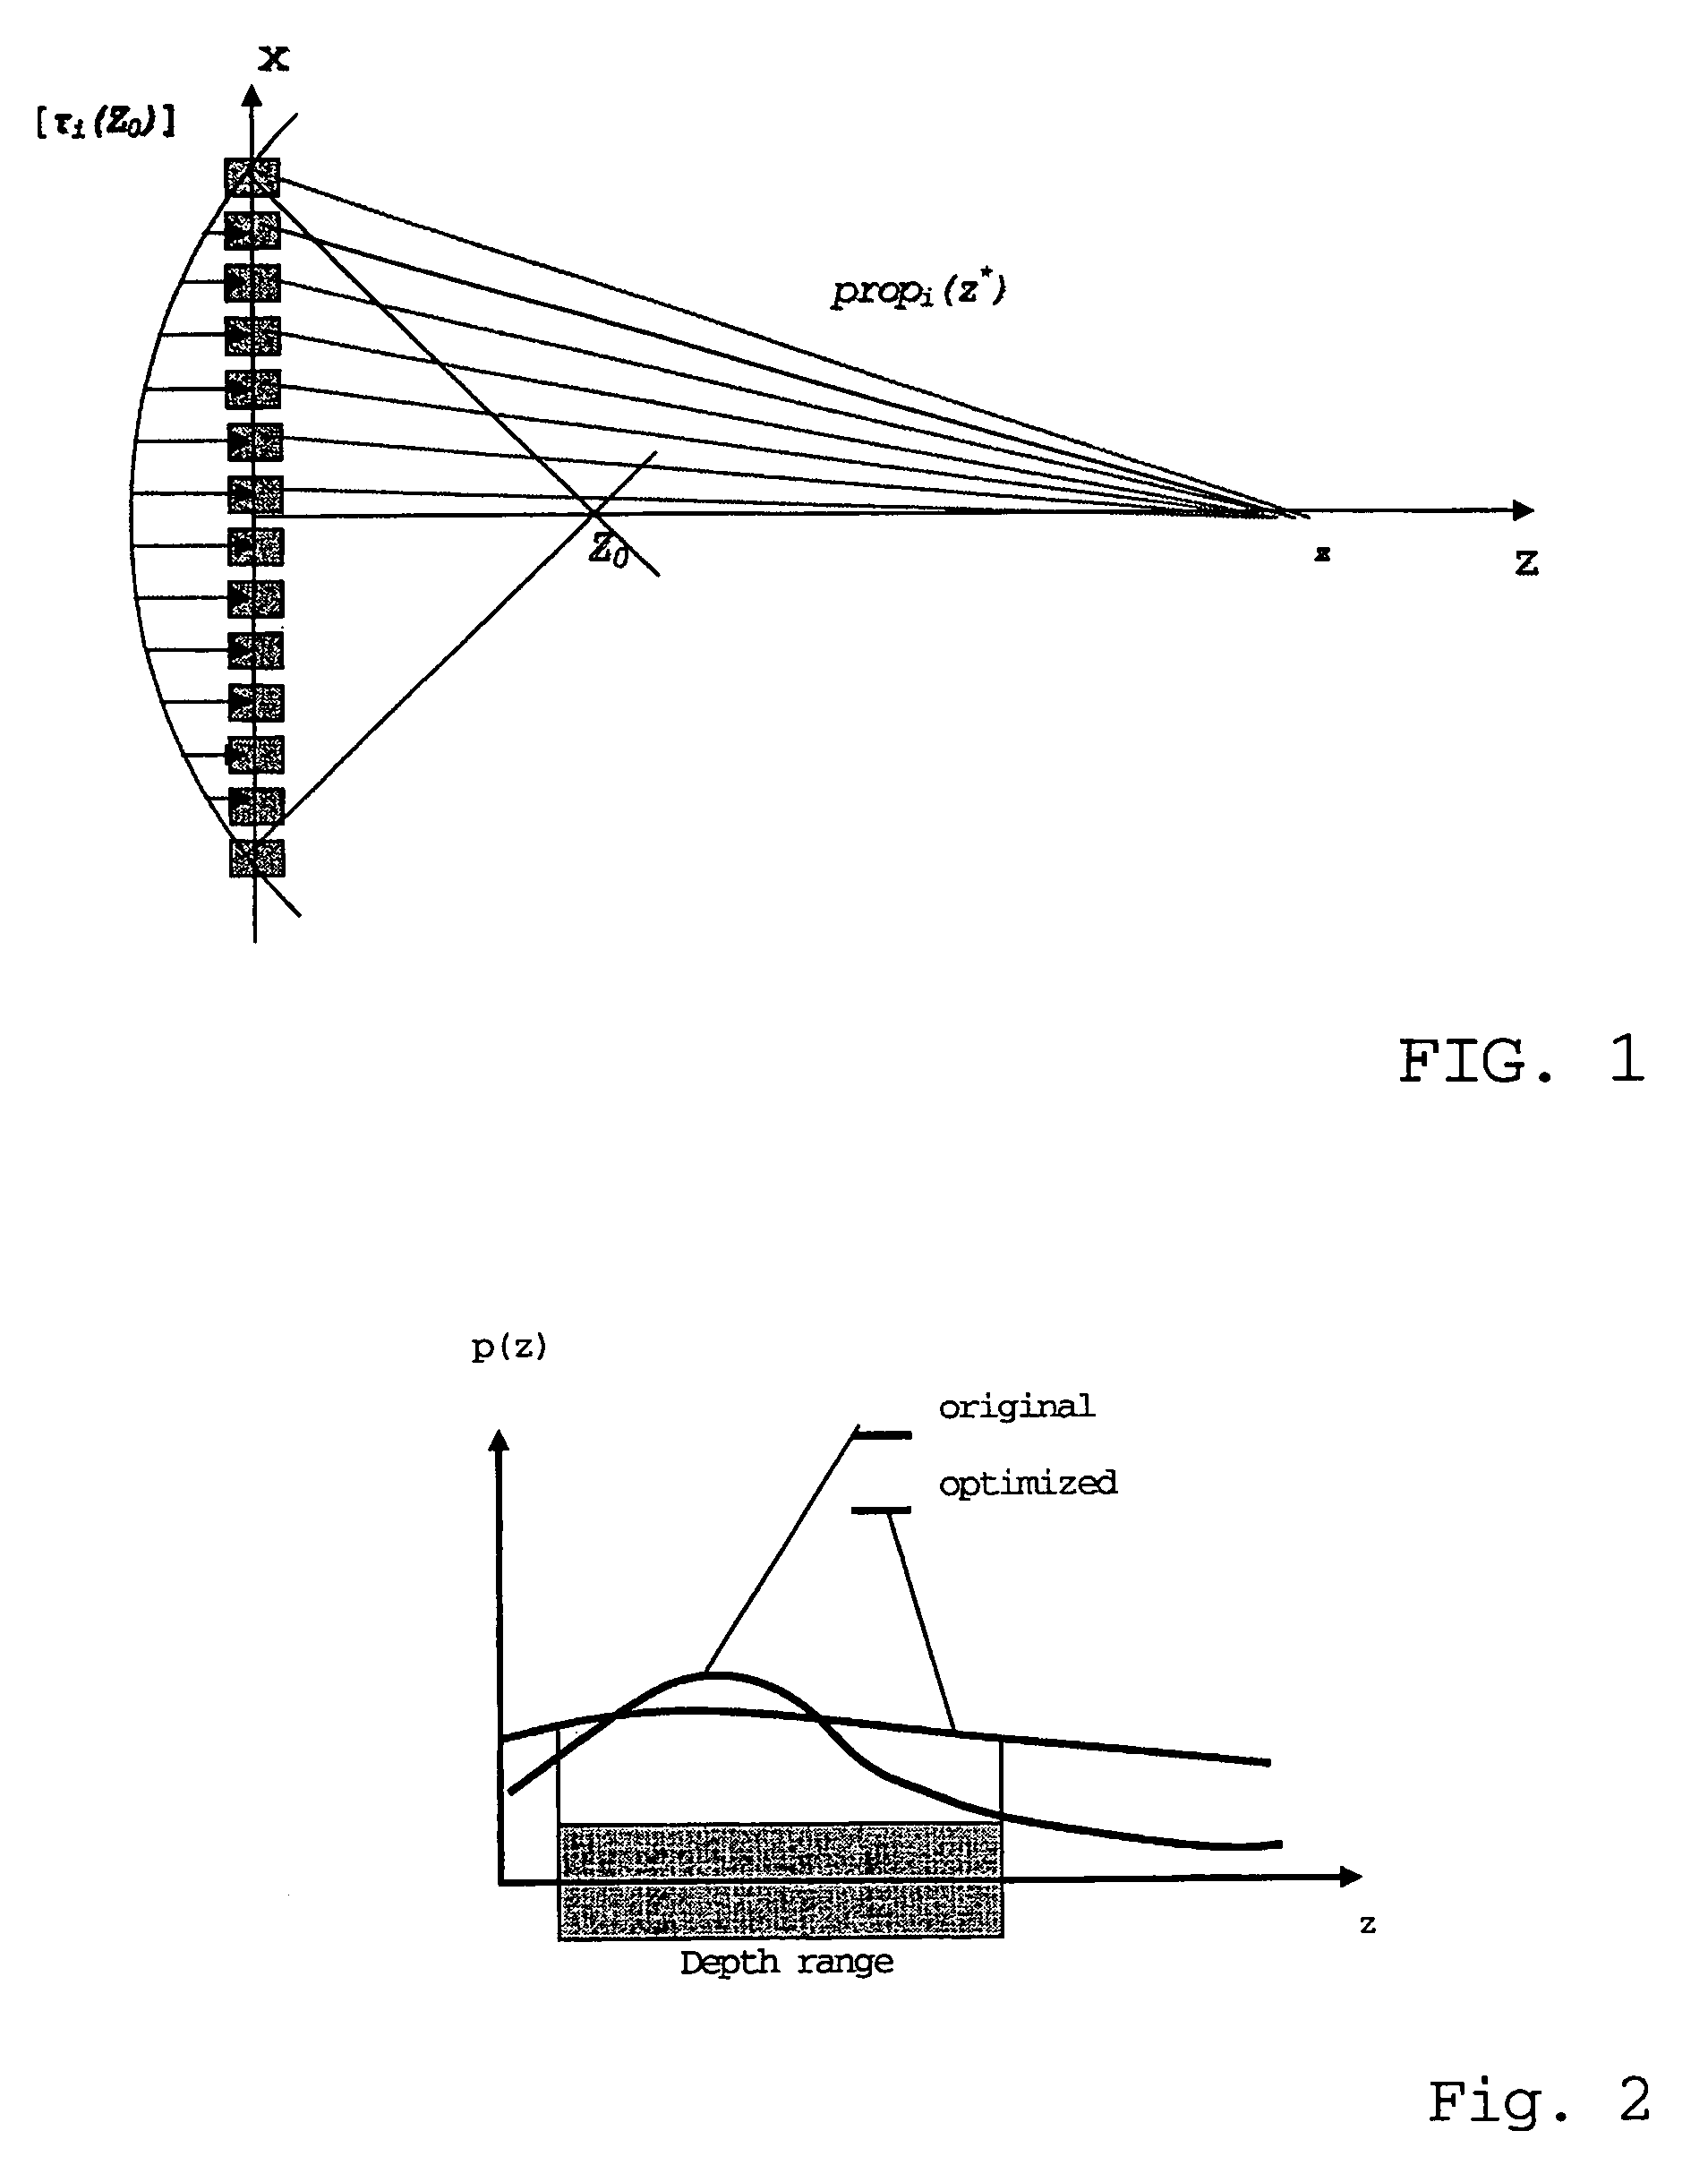 Method for optimization of transmit and receive ultrasound pulses, particularly for ultrasonic imaging